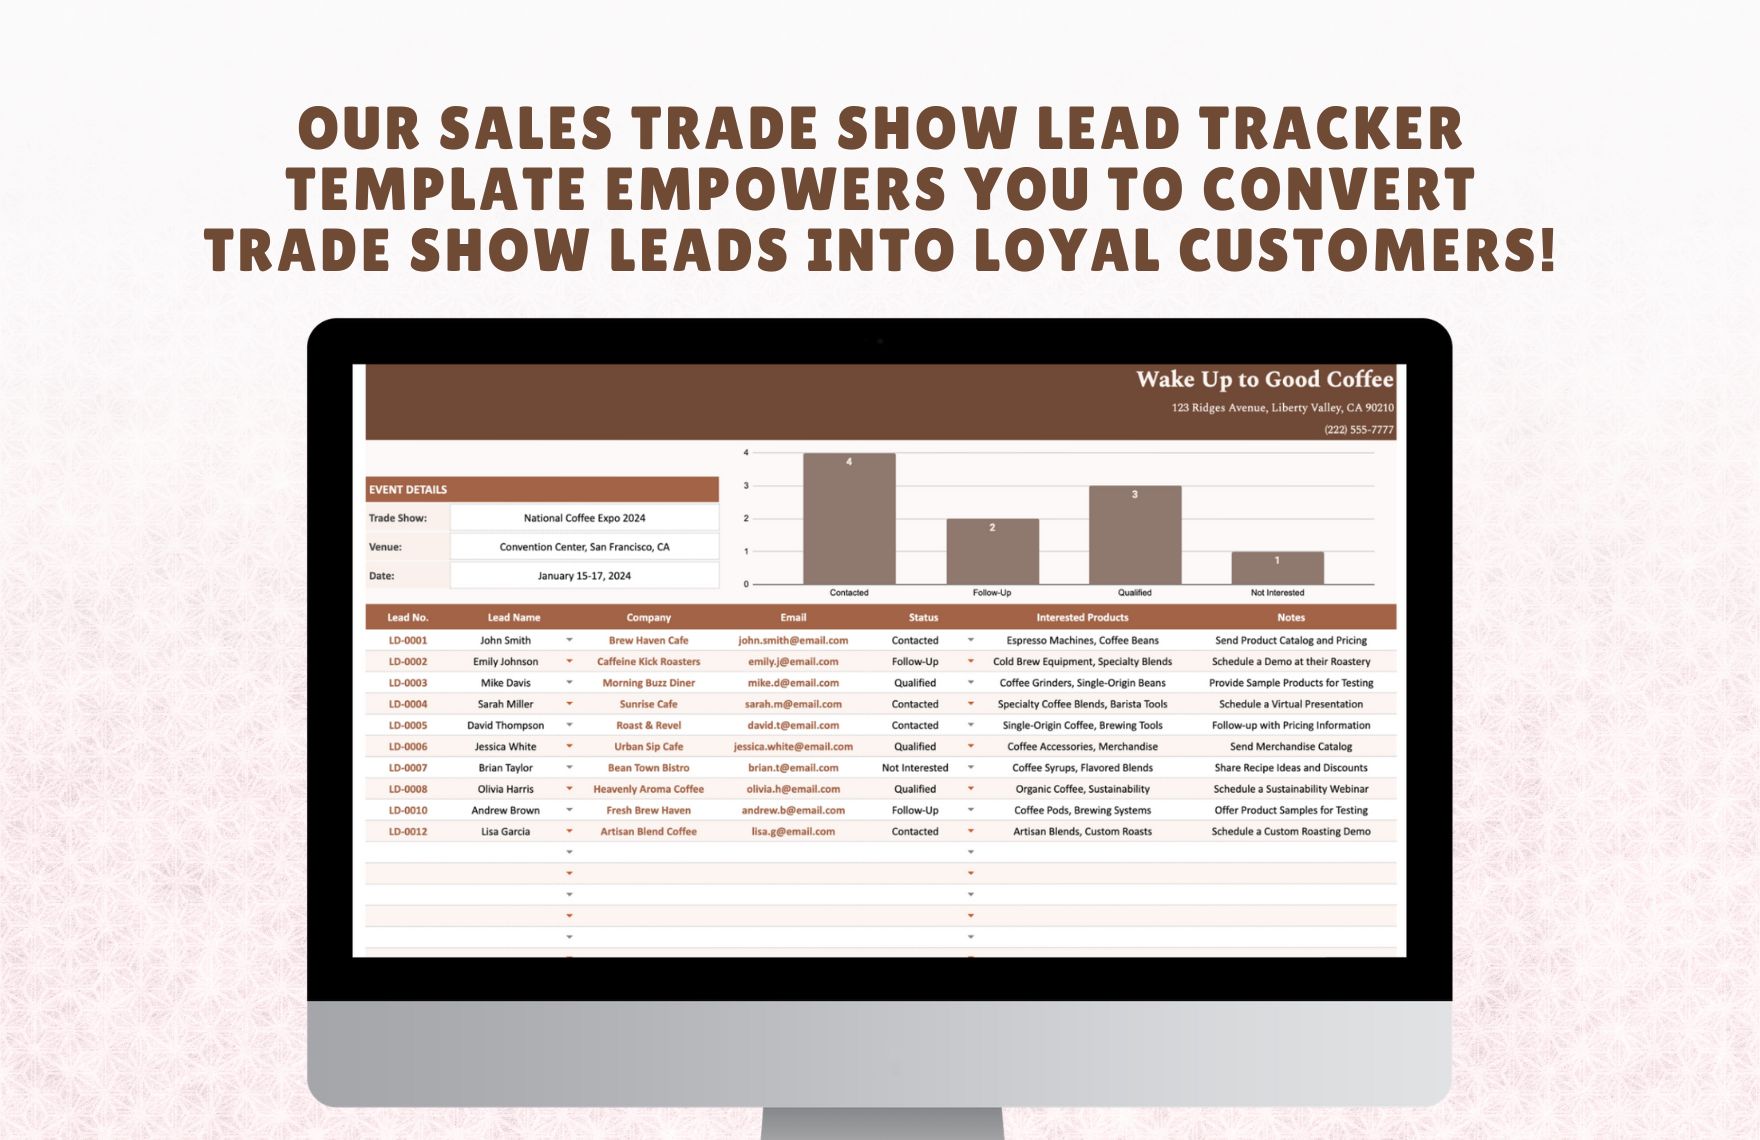 Sales Trade Show Lead Tracker Template